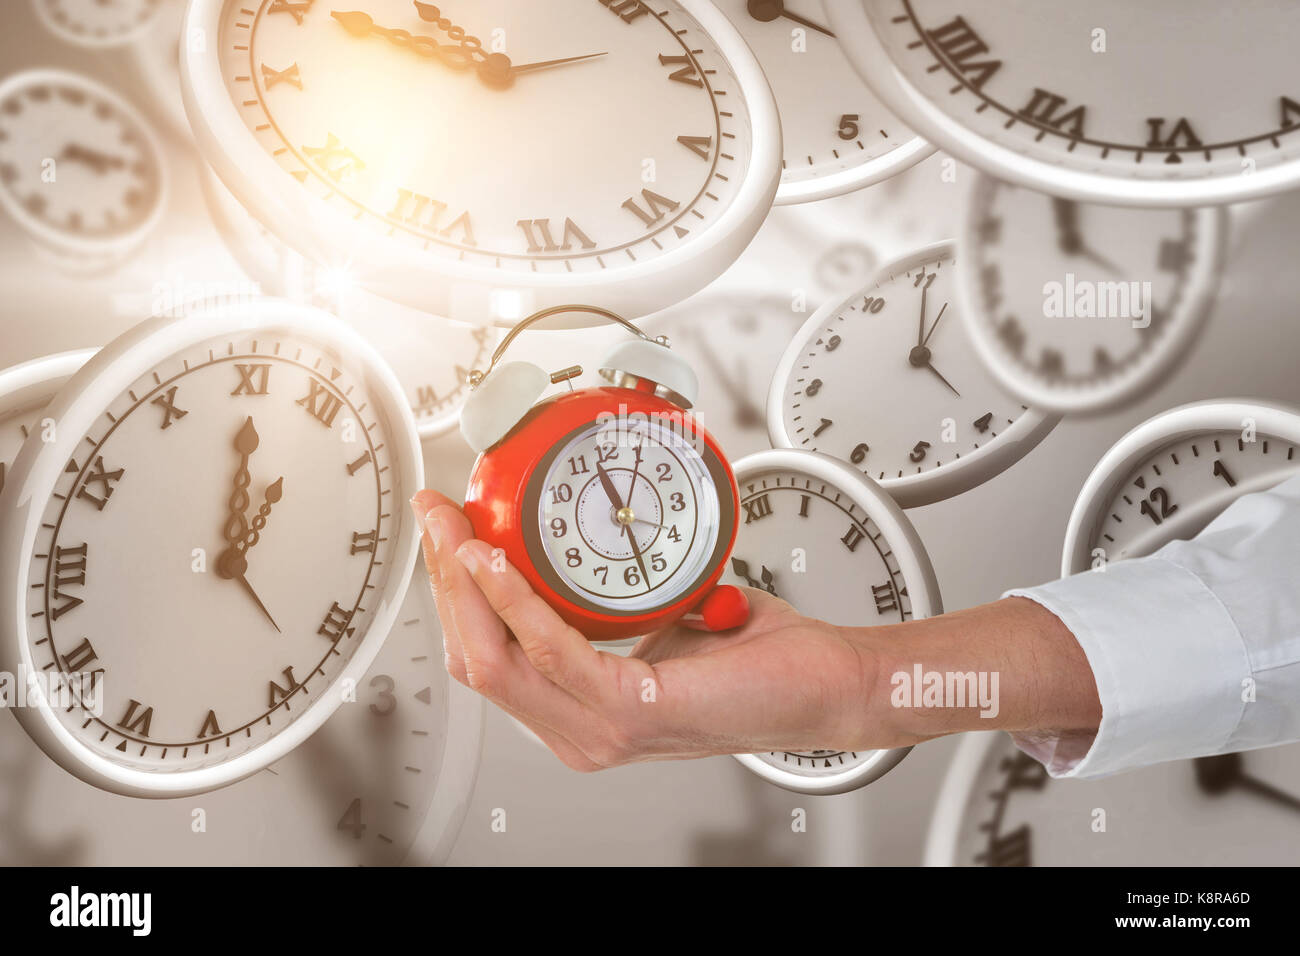 Cropped hand holding alarm clock against digitally generated image of clocks Stock Photo